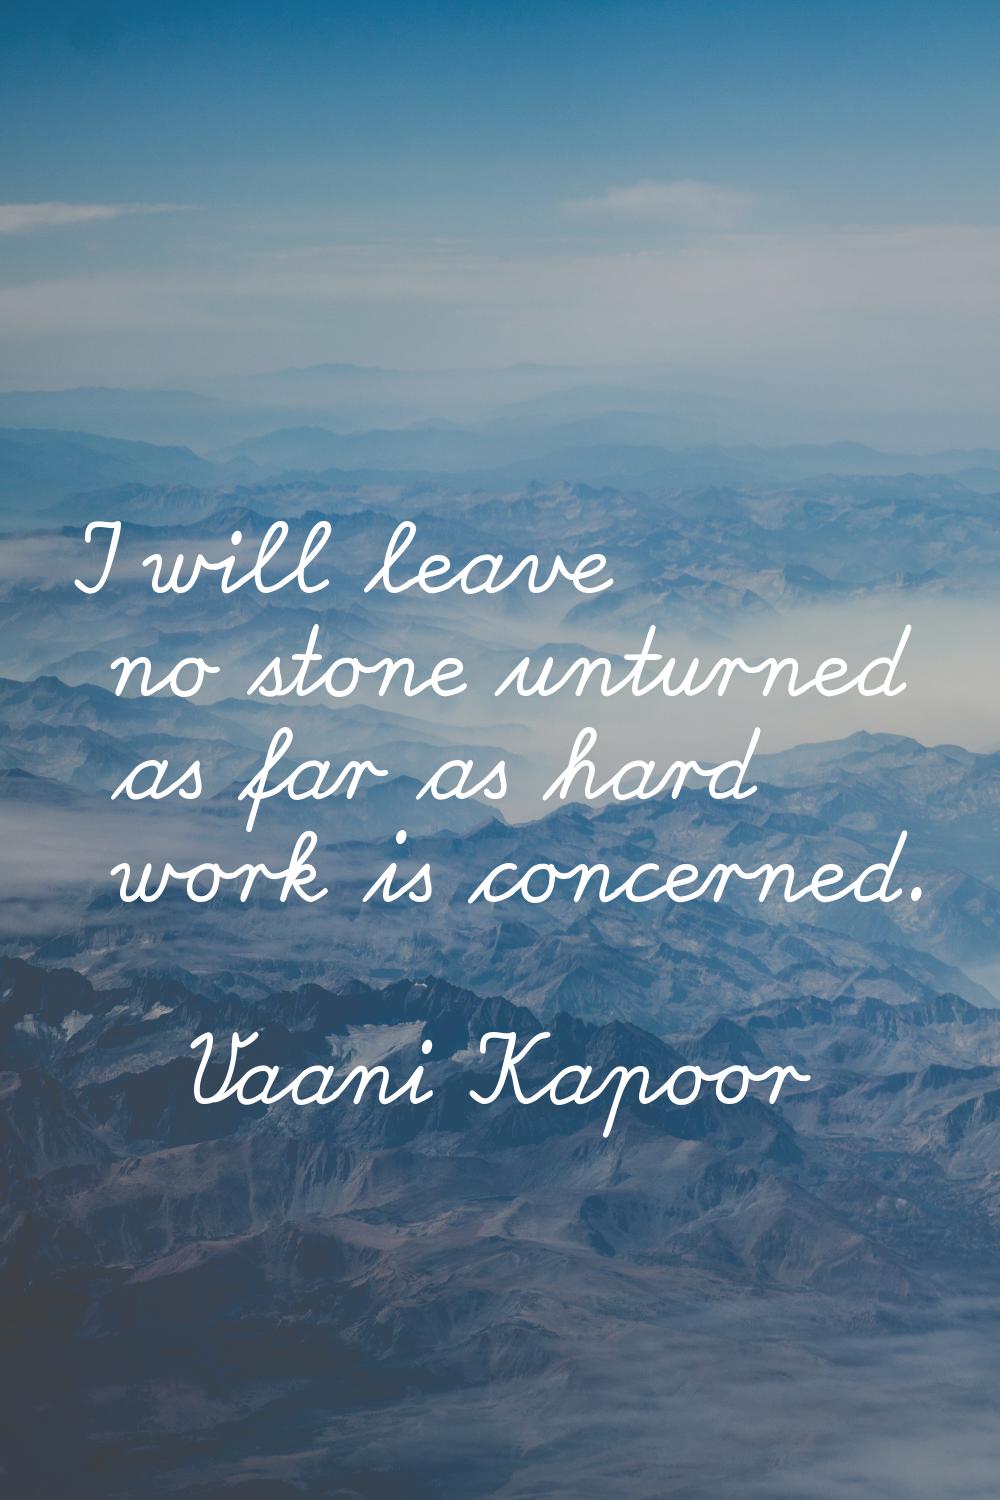 I will leave no stone unturned as far as hard work is concerned.